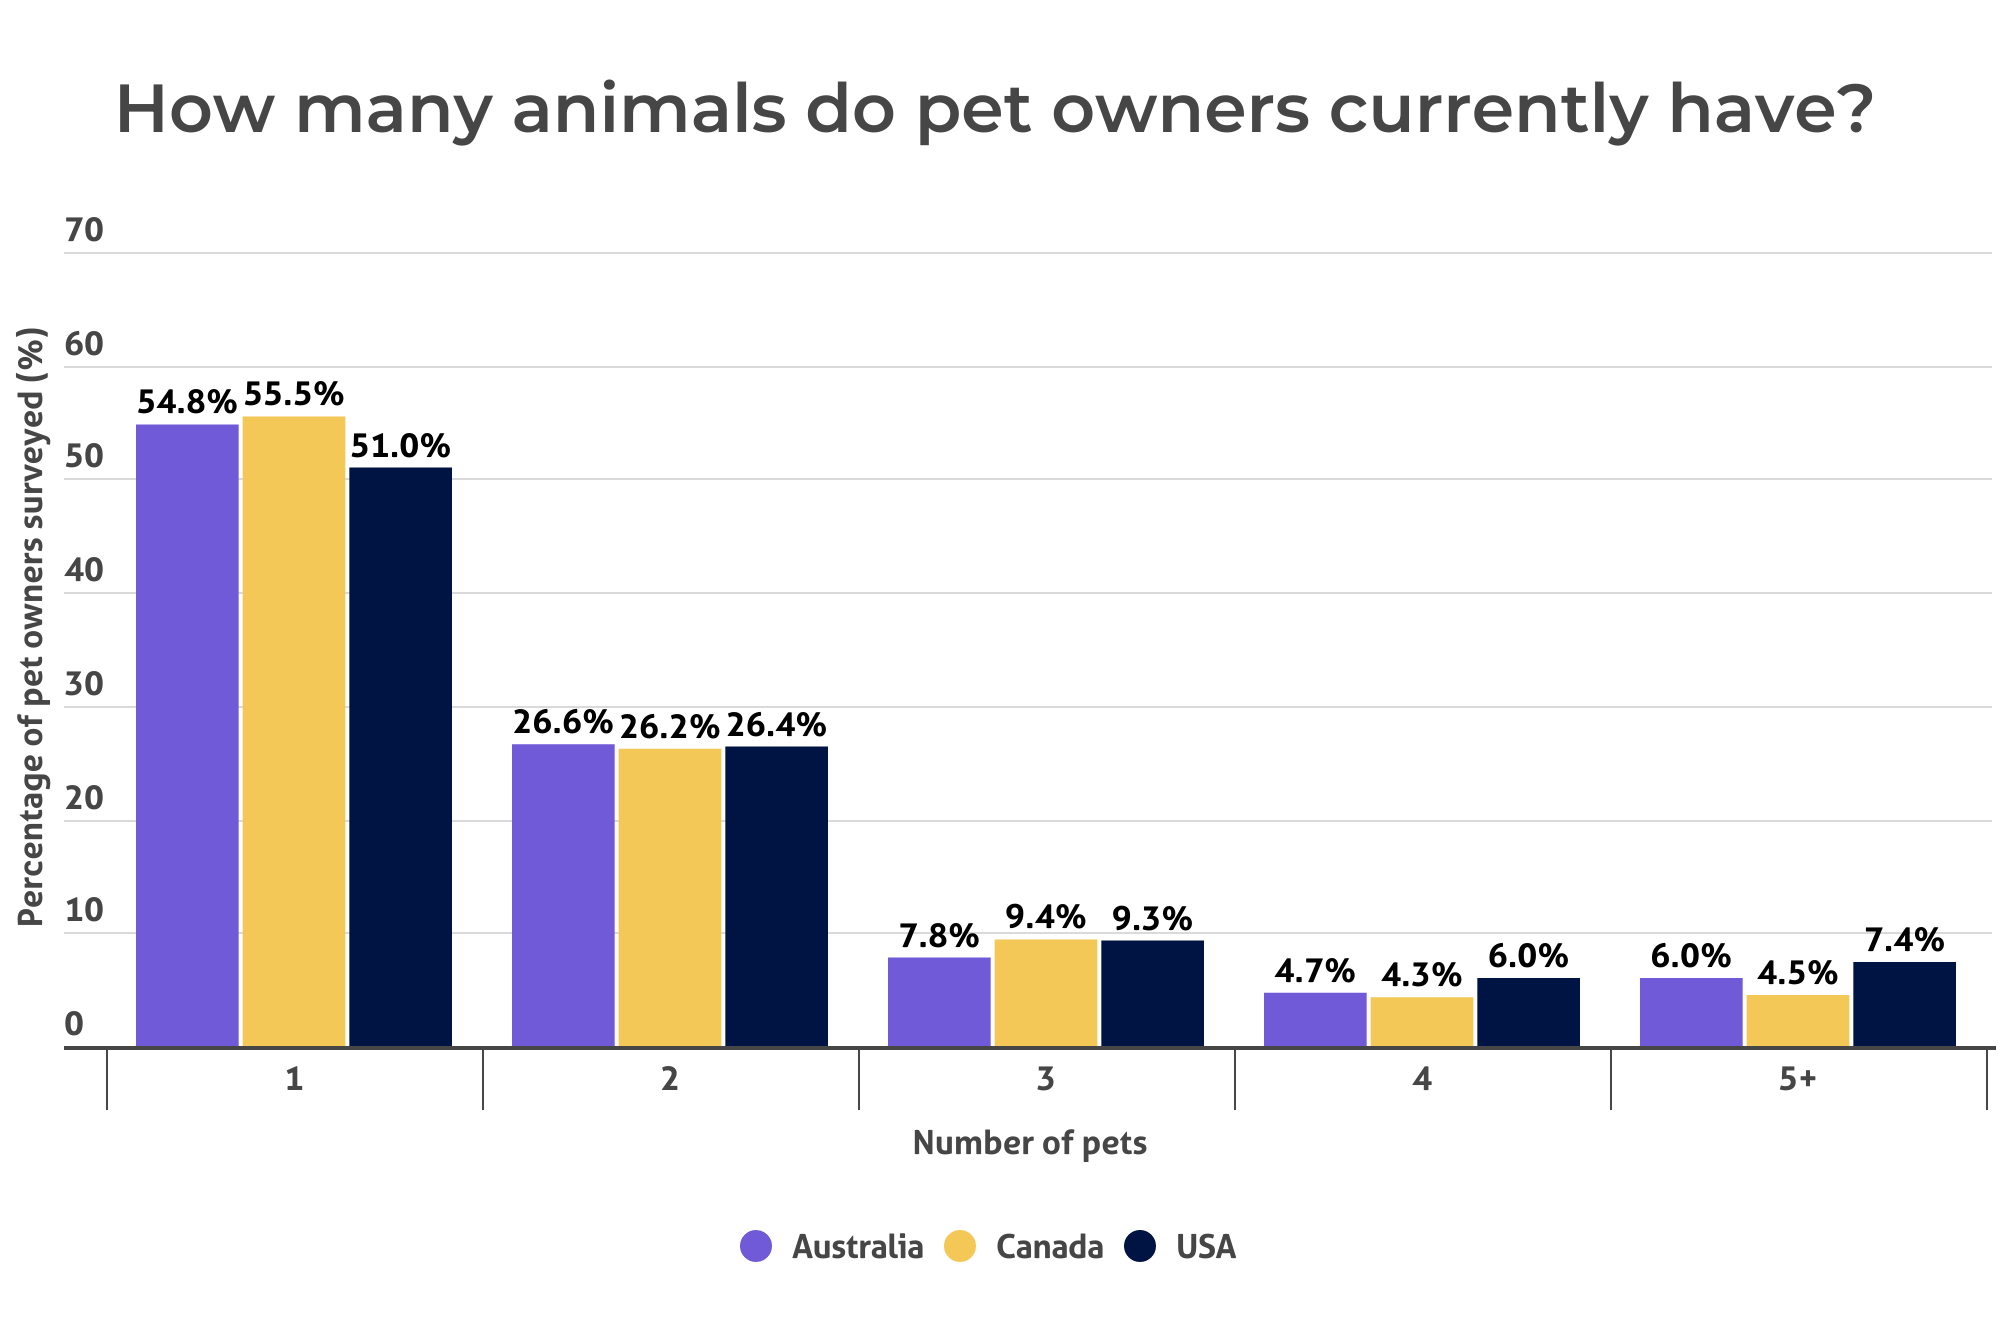 A bar chart showing how many pets people have